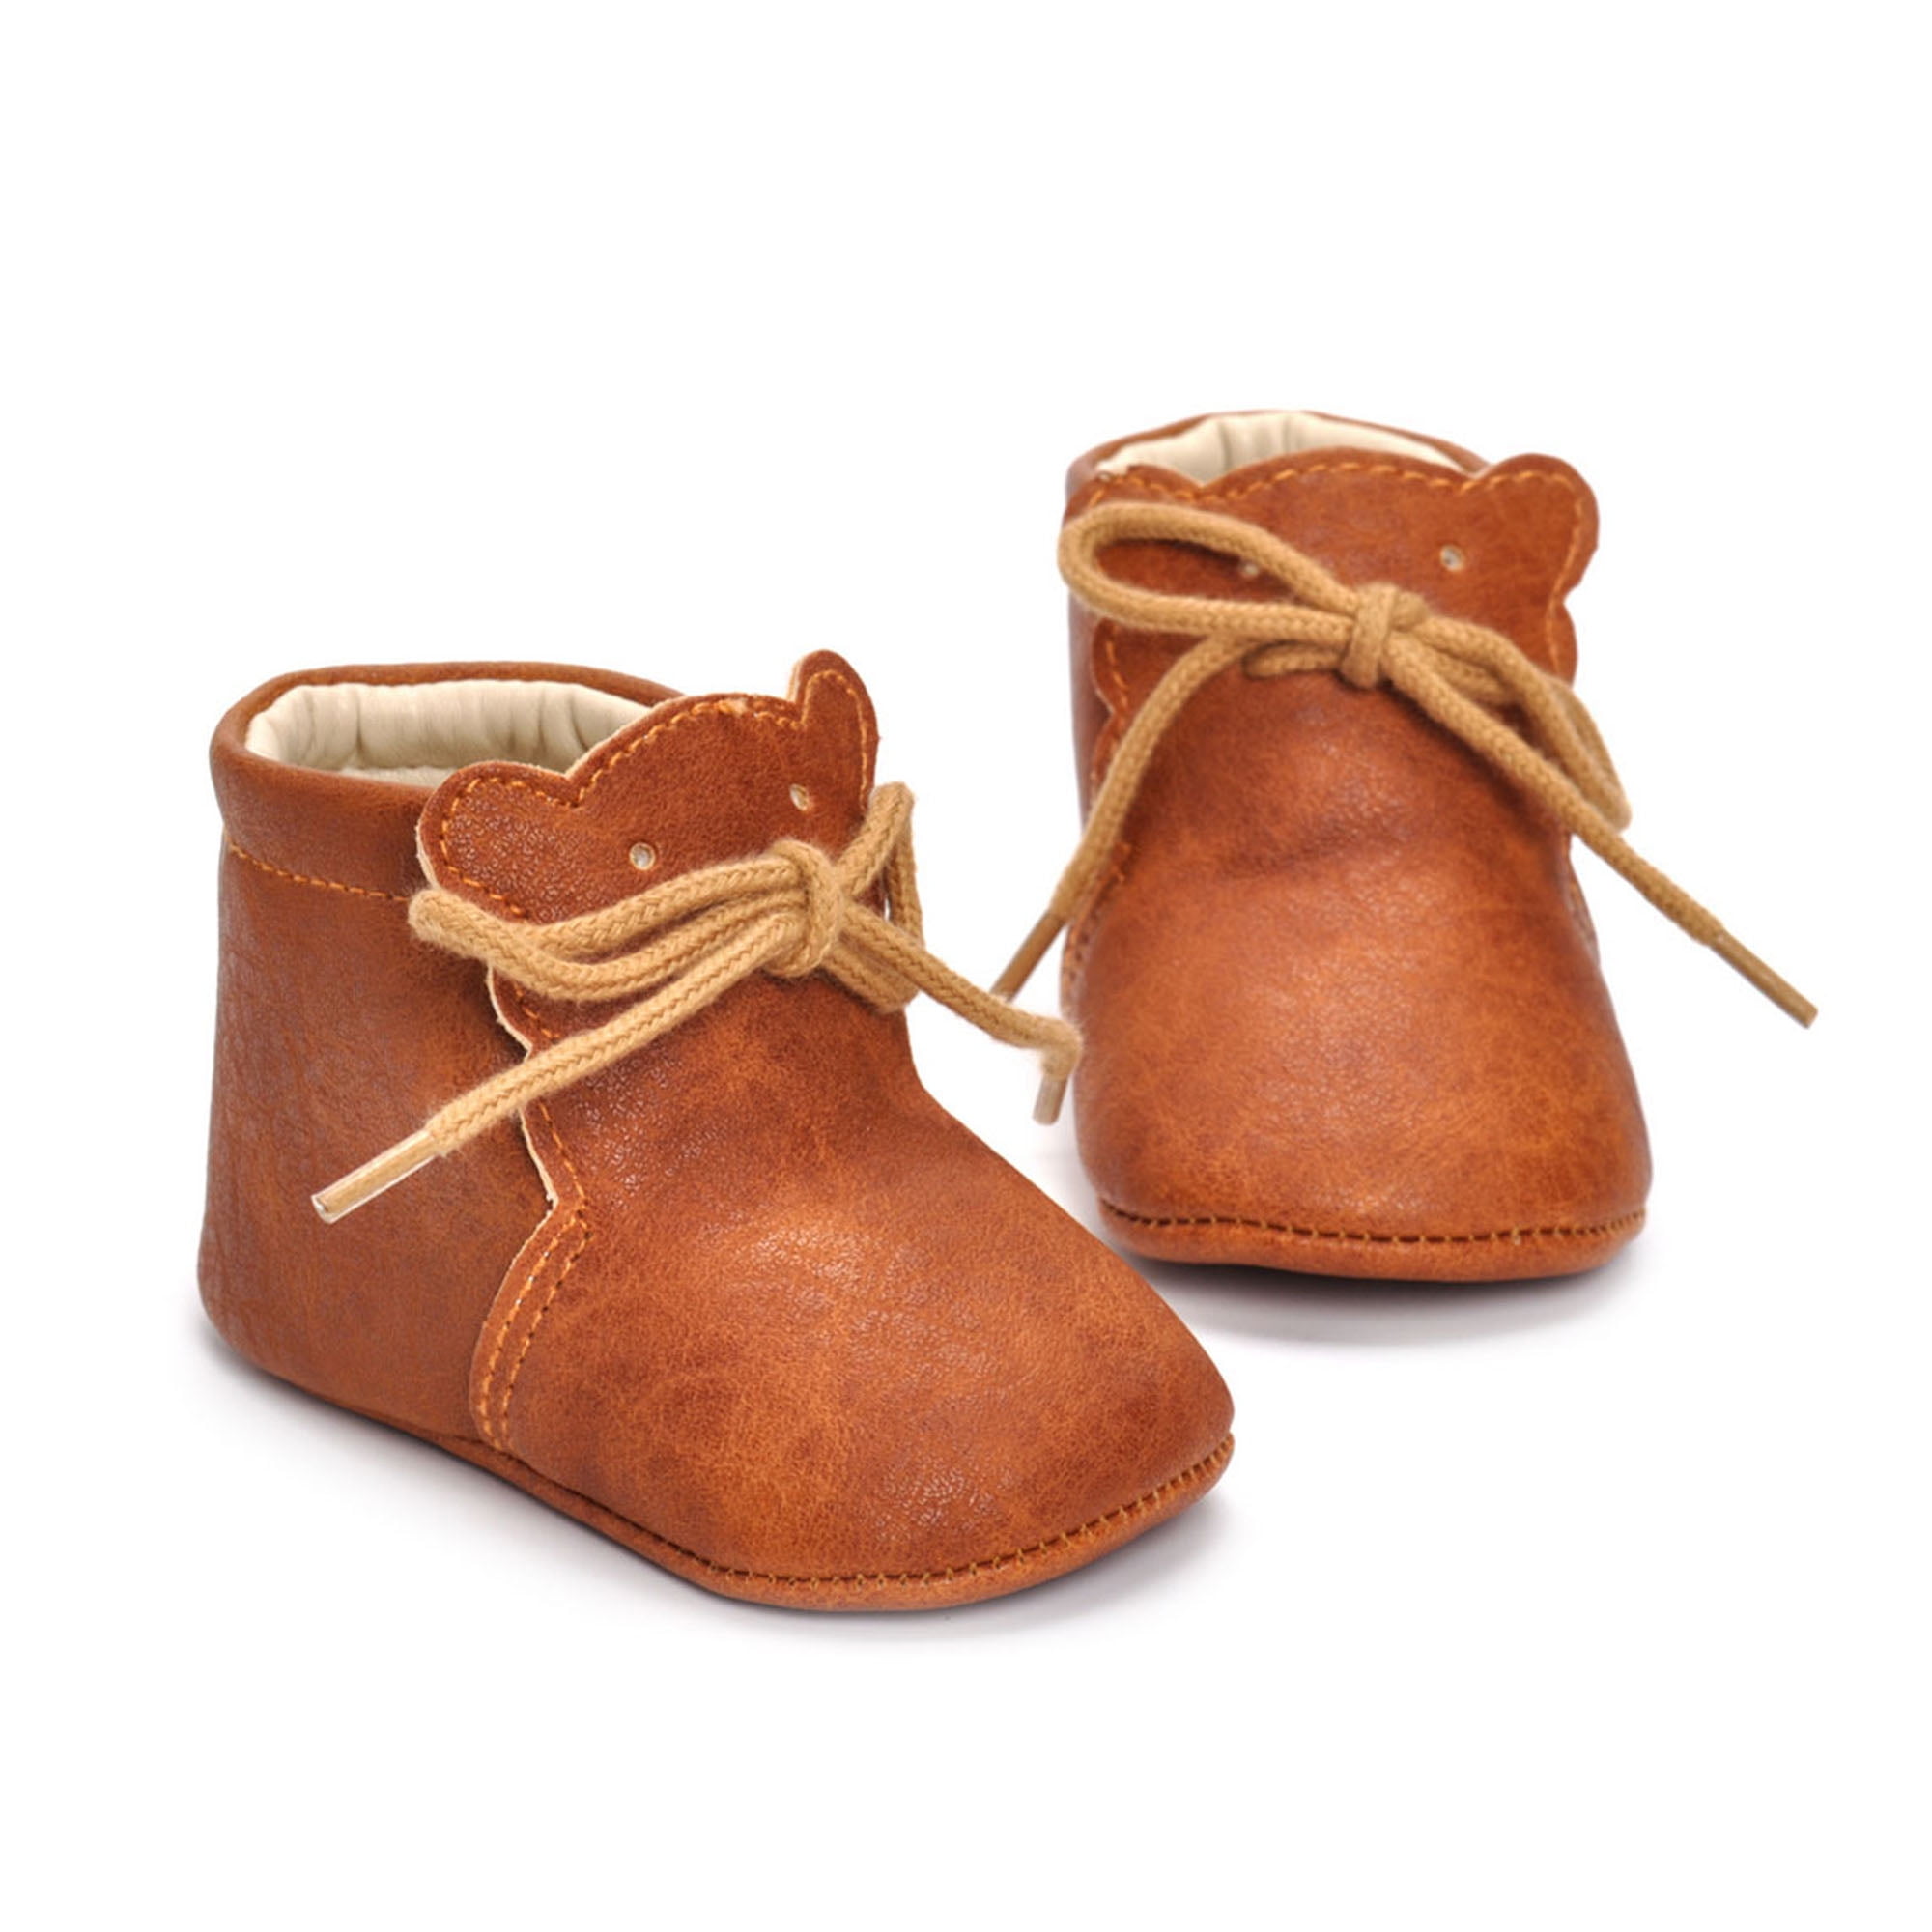 soft leather moccasins